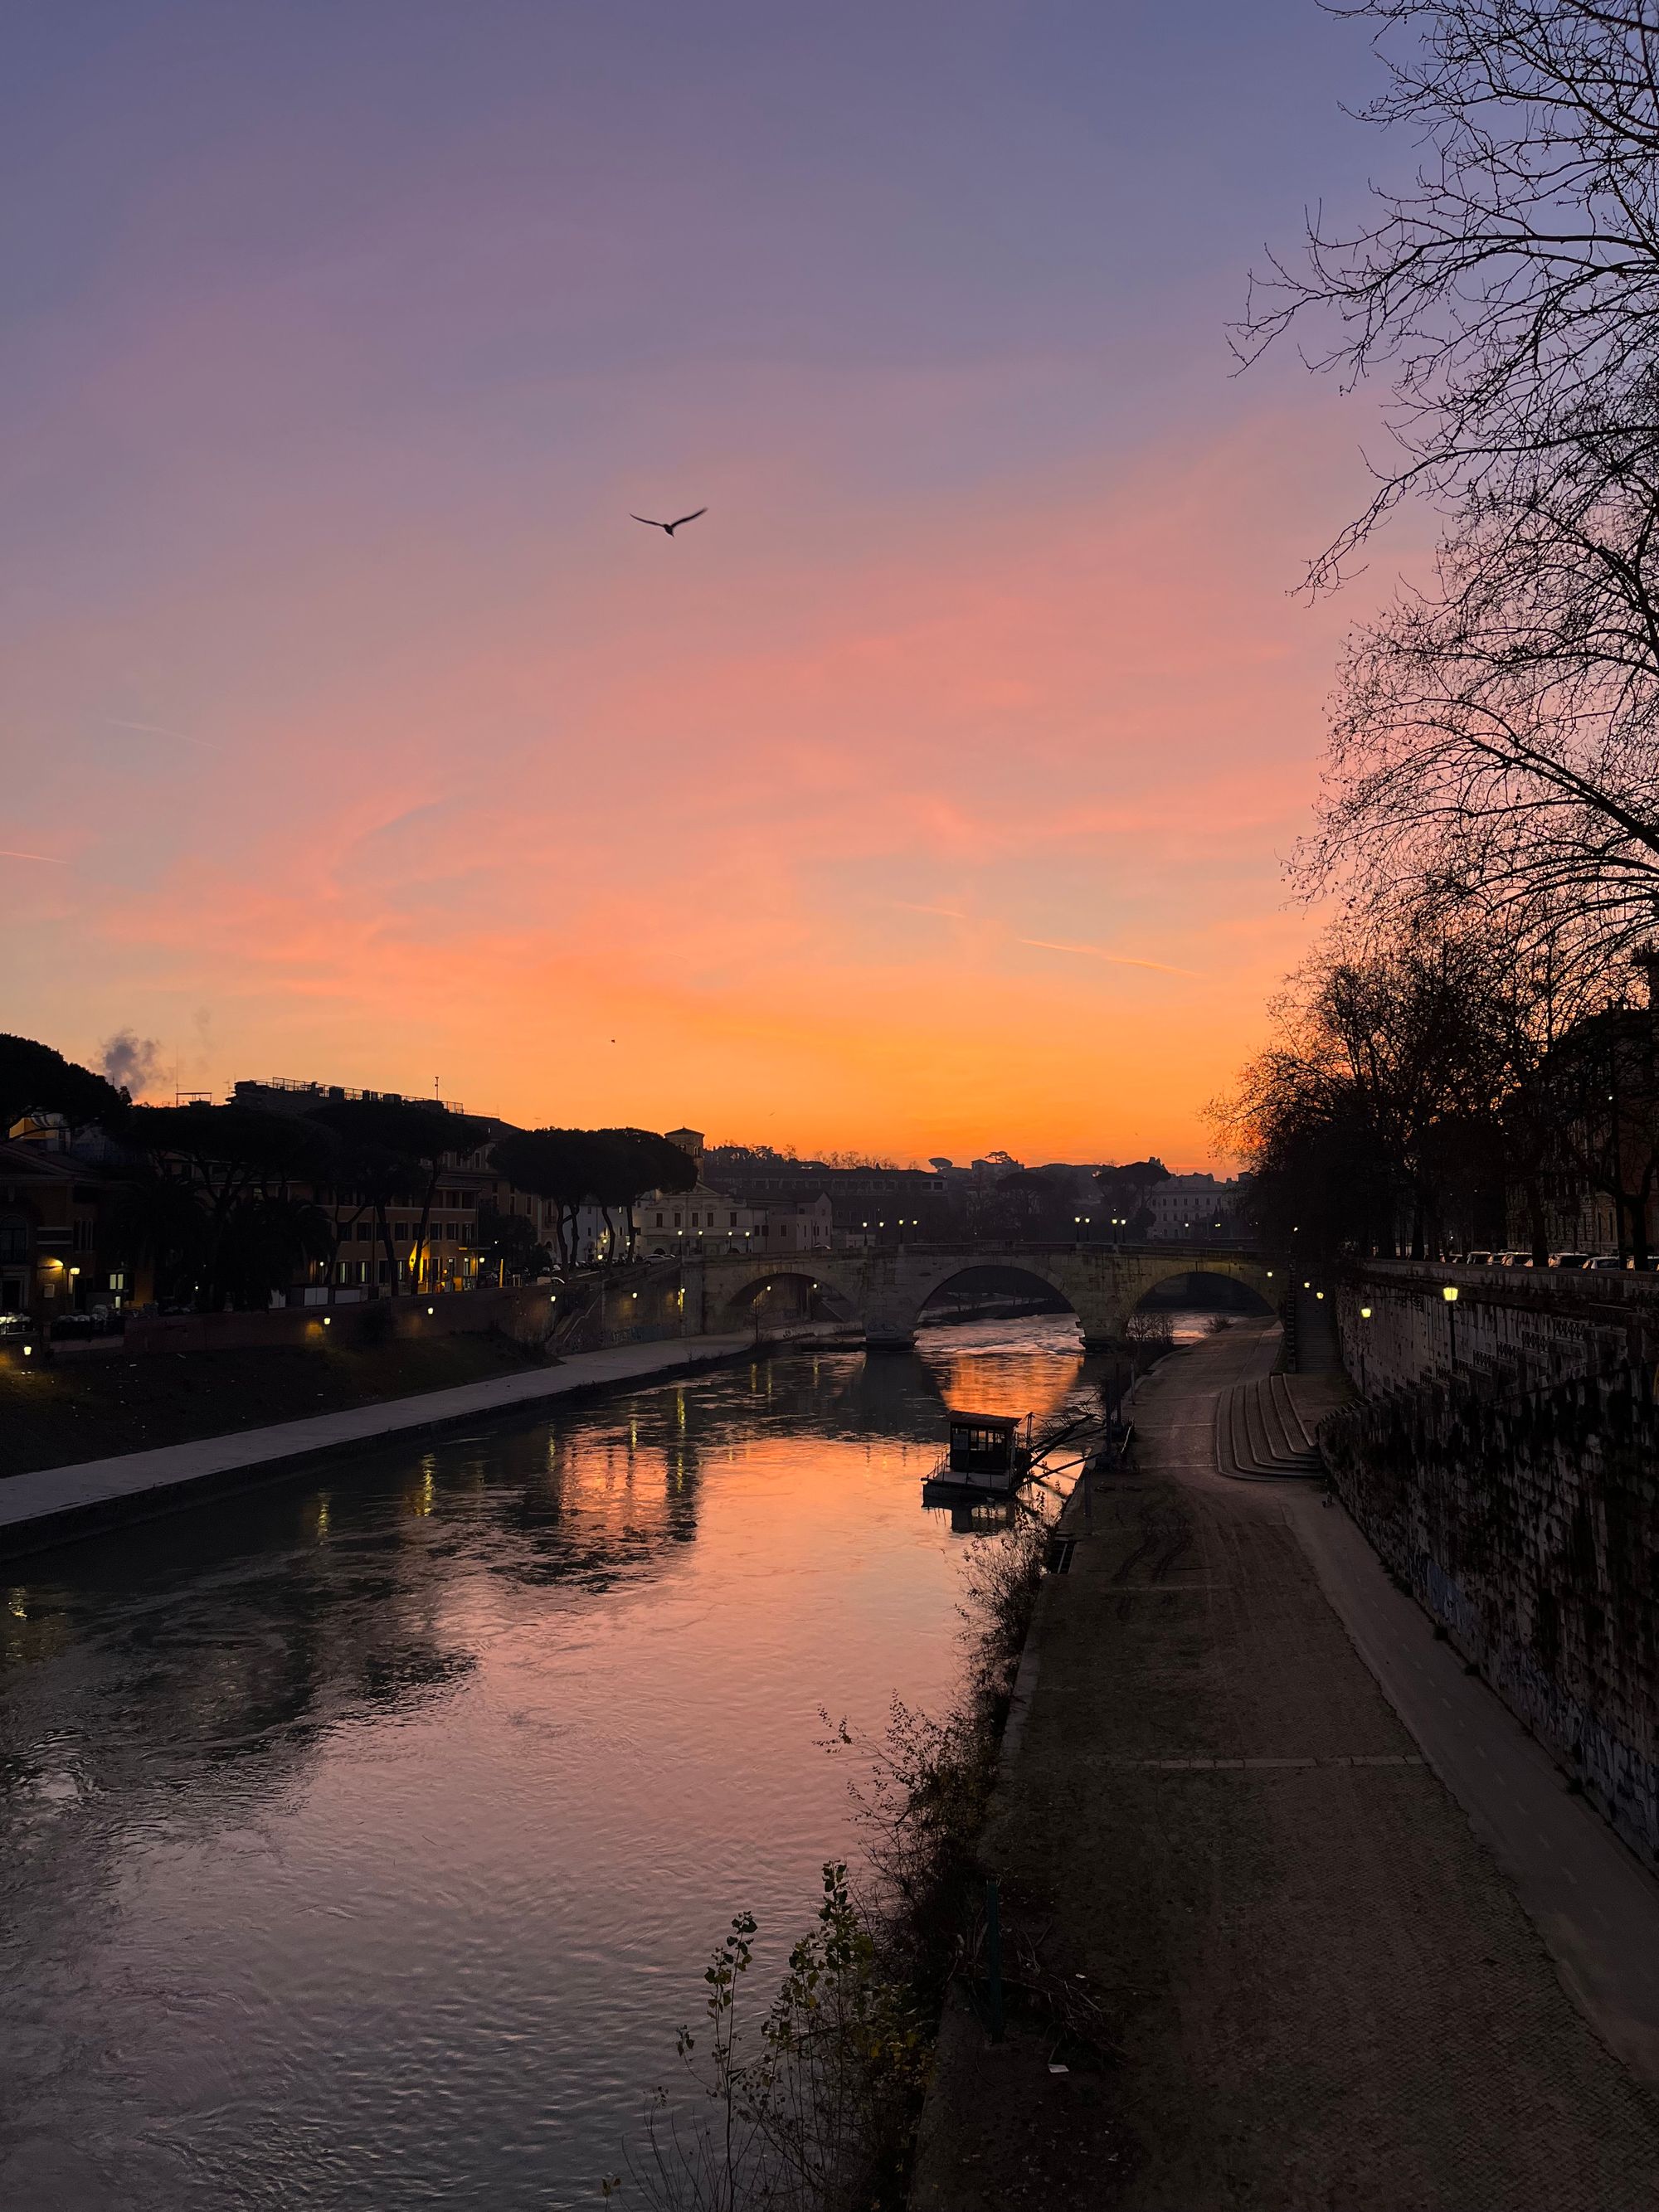 A river in the center of the frame, leading to a bridge. The sky is pink and orange and is reflecting off the water. A seagull silhouette in the sky.